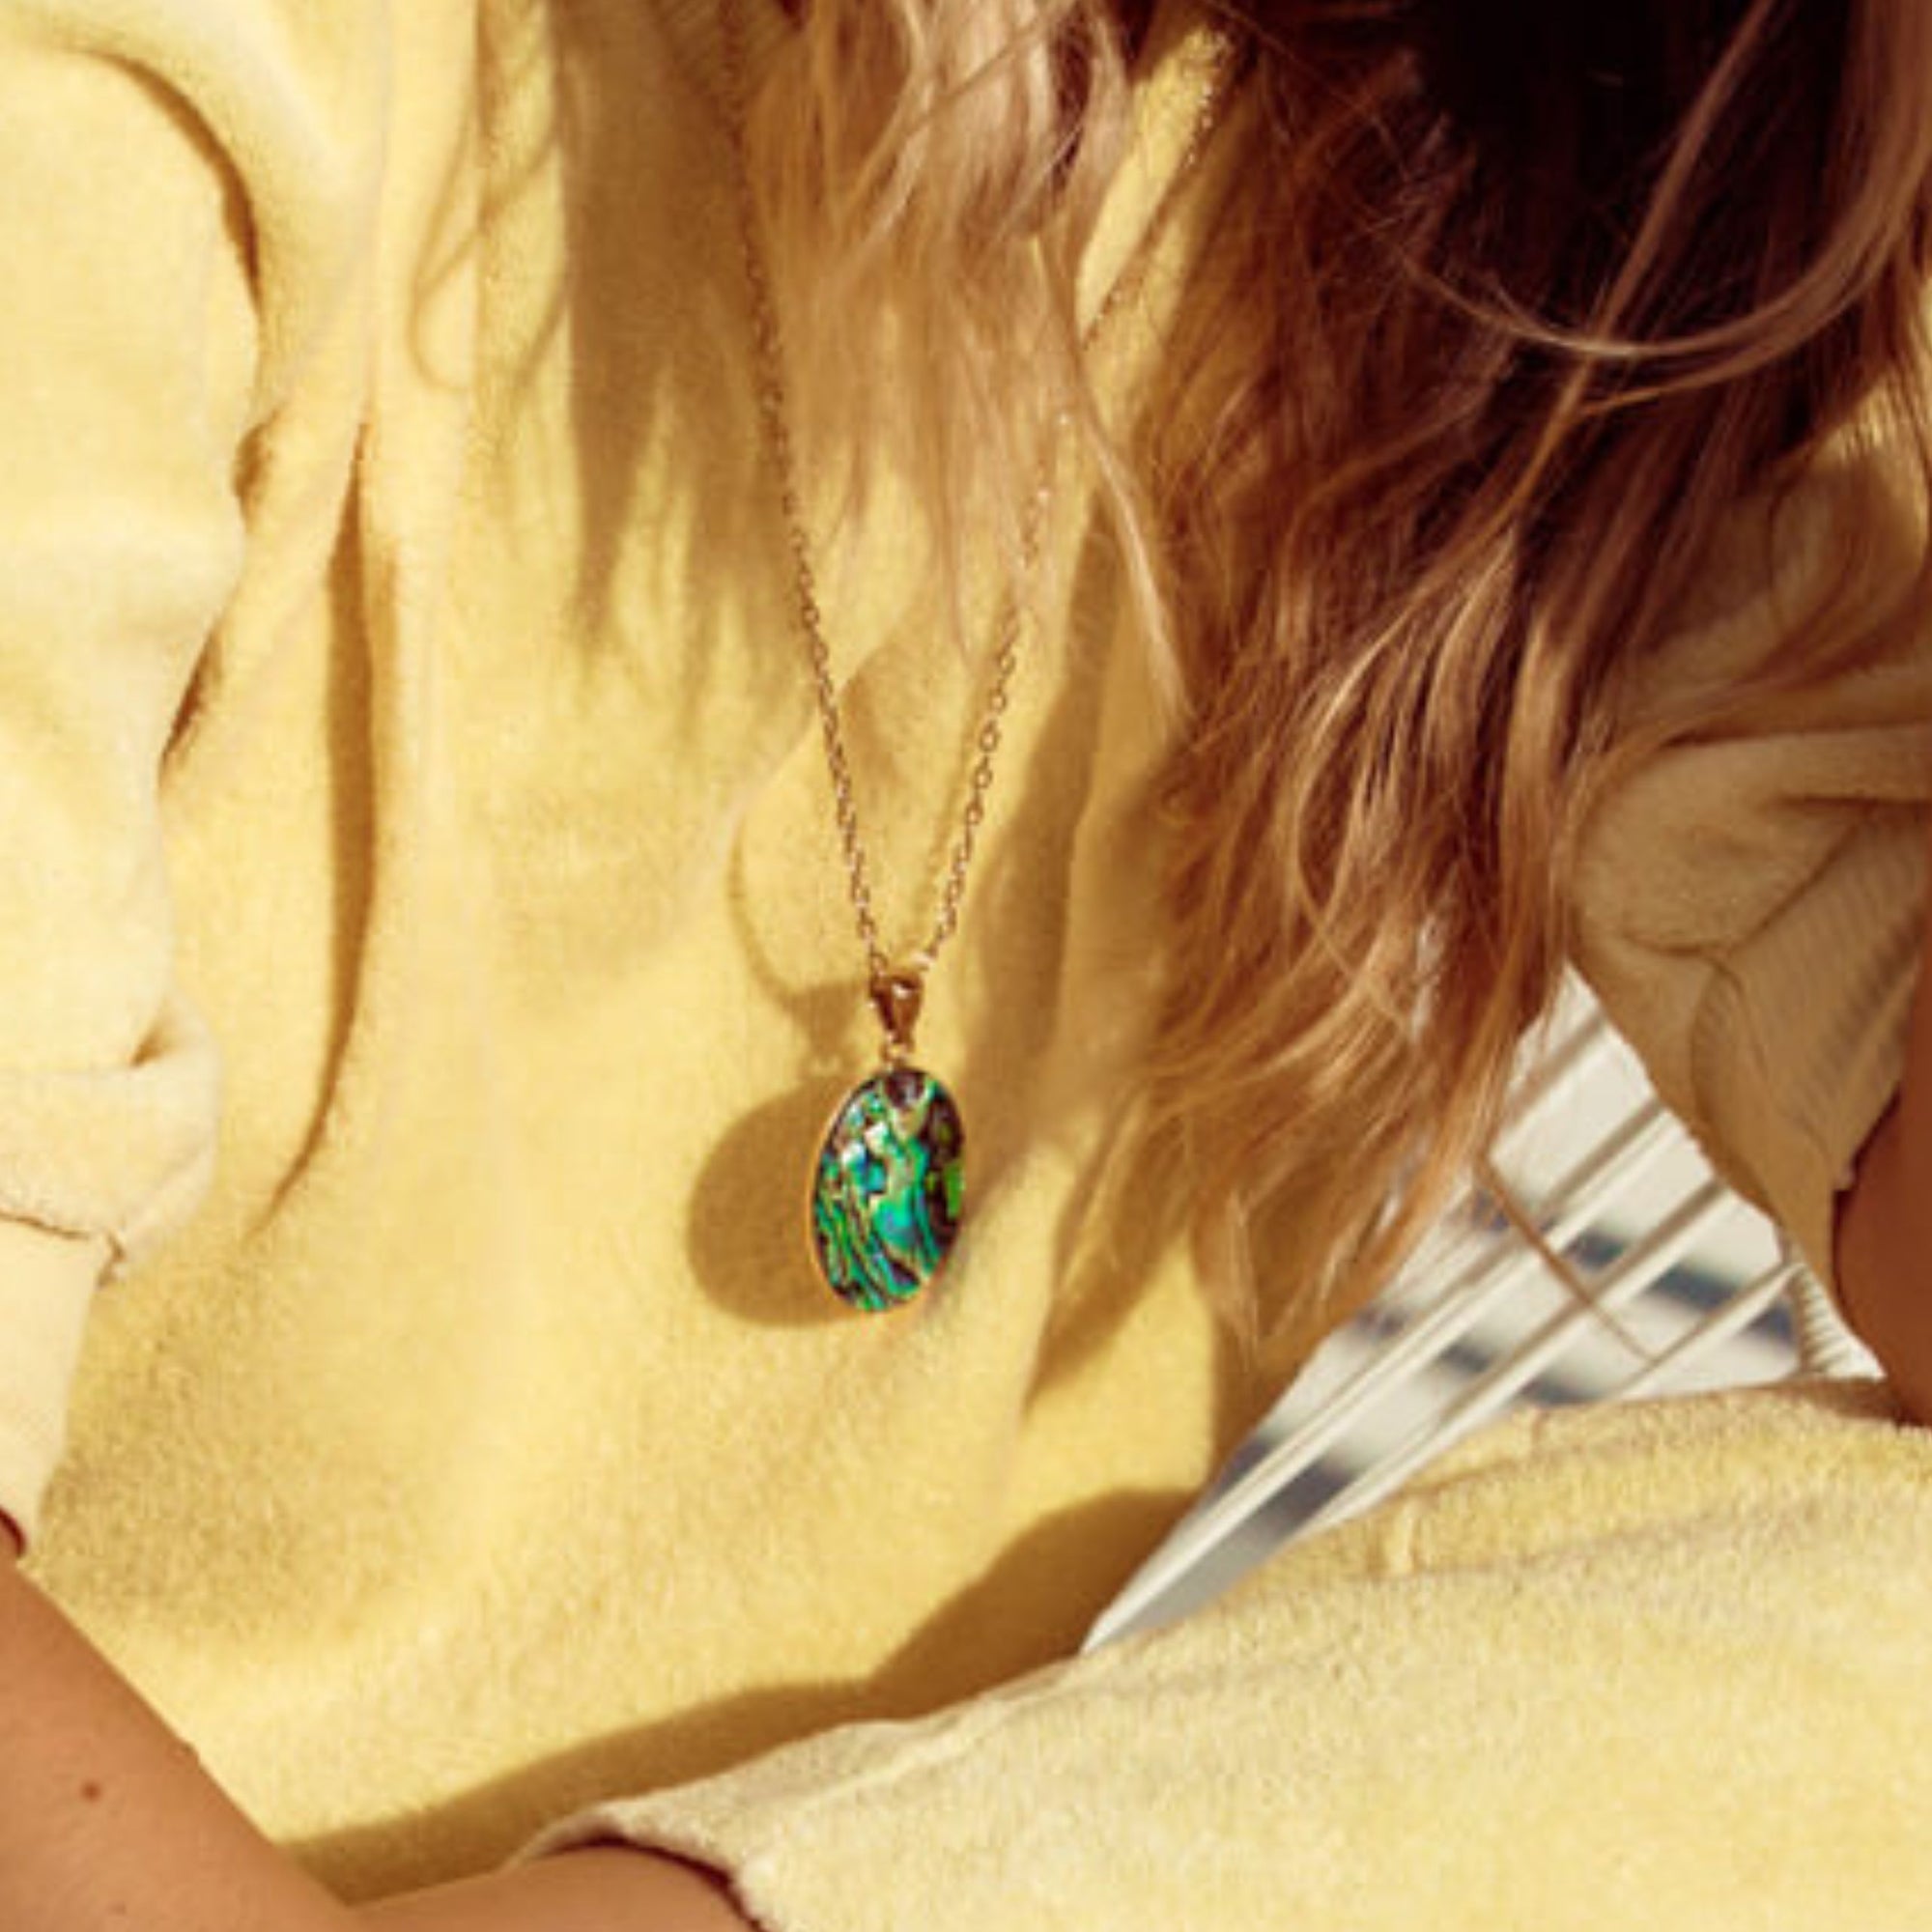 Charles Albert Jewelry - Alchemia Natural Abalone Pendant - In Use